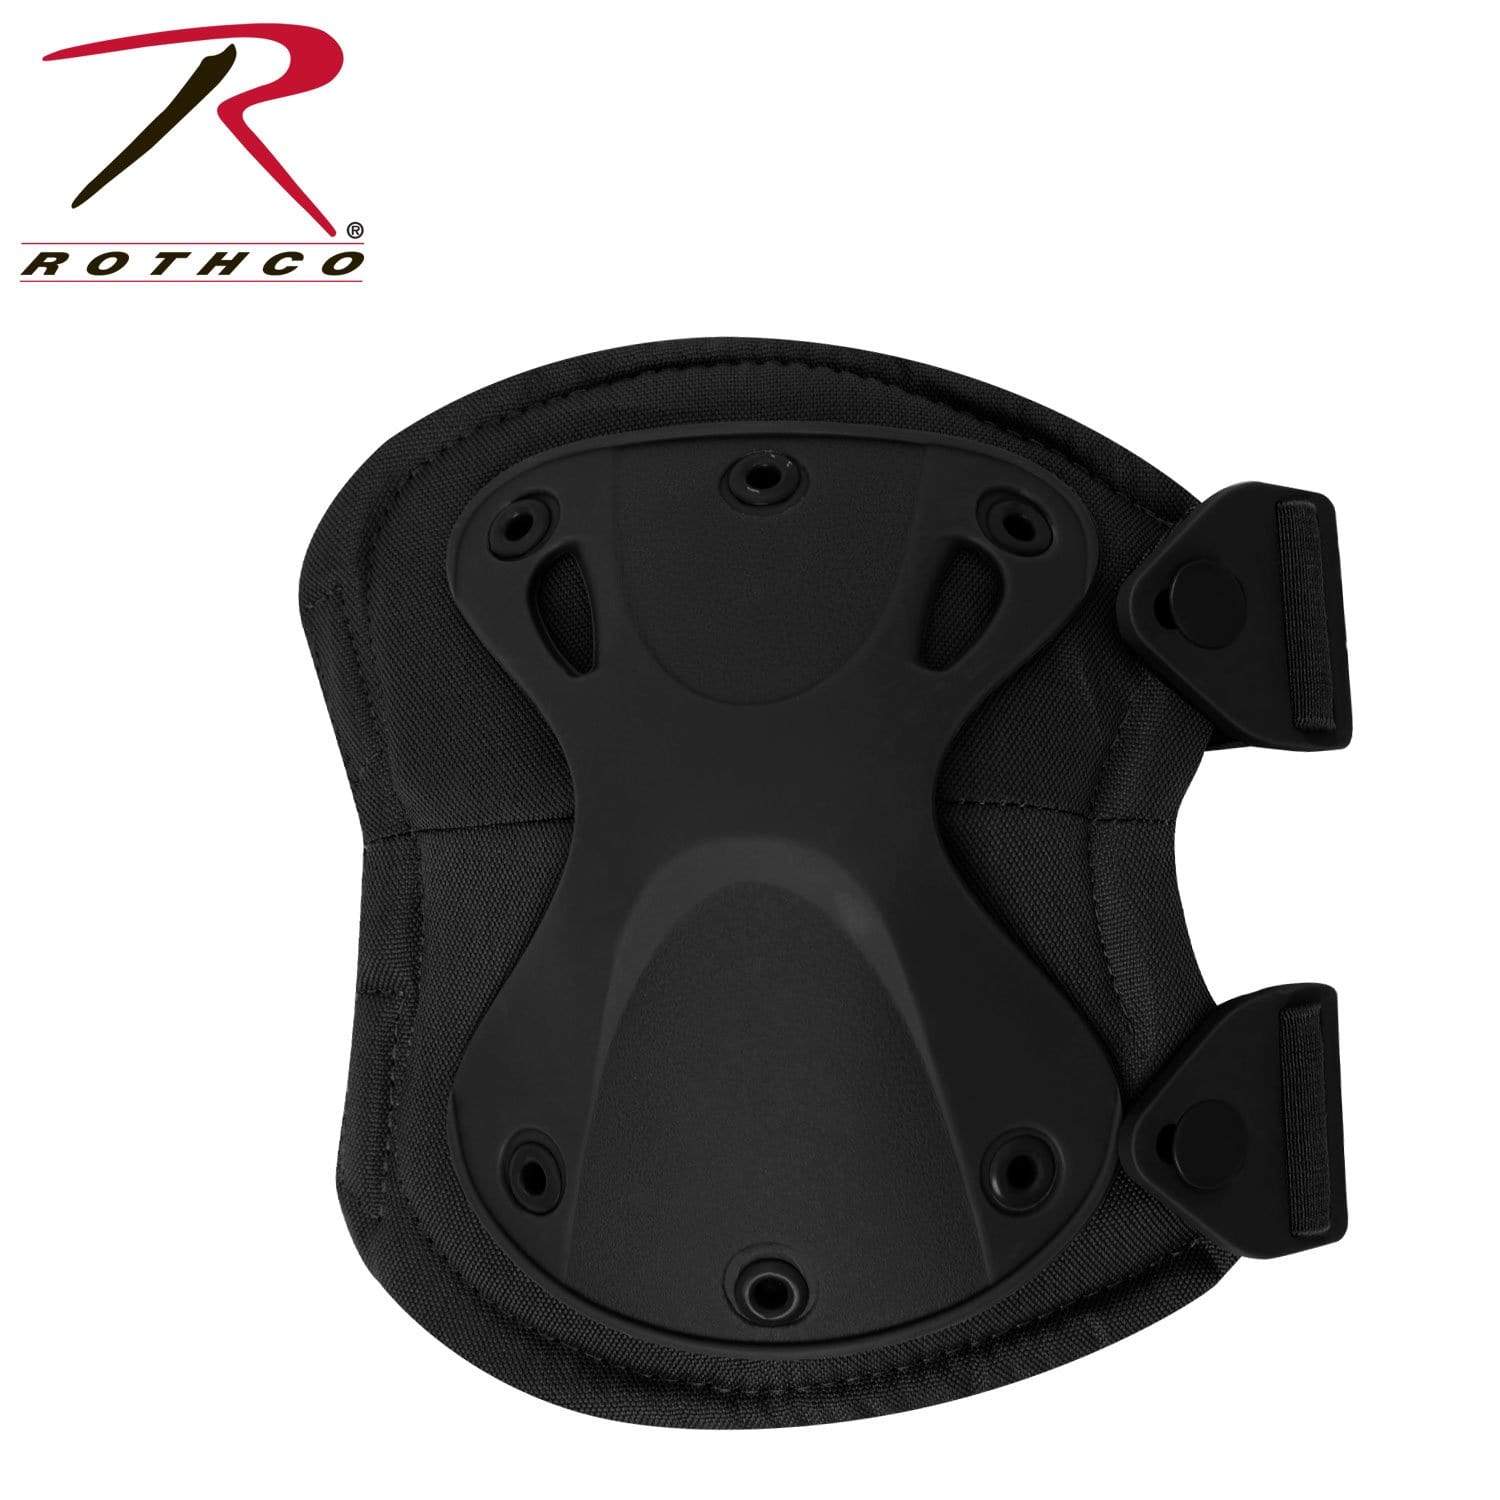 Rothco Low Profile Tactical Knee Pads - Eminent Paintball And Airsoft